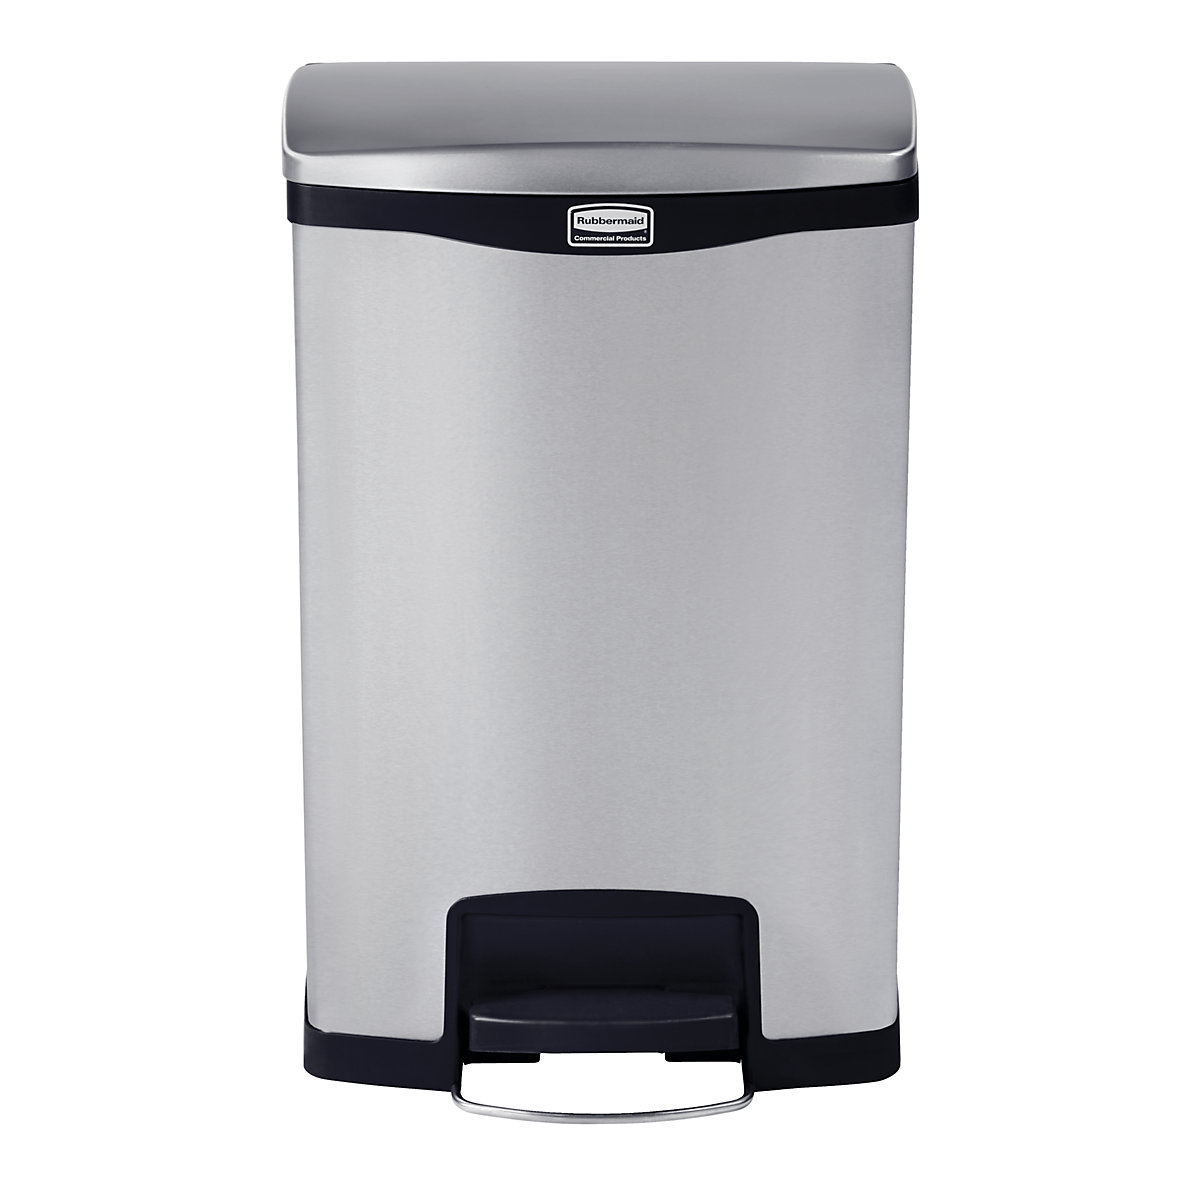 SLIM JIM® stainless steel waste collector with pedal – Rubbermaid